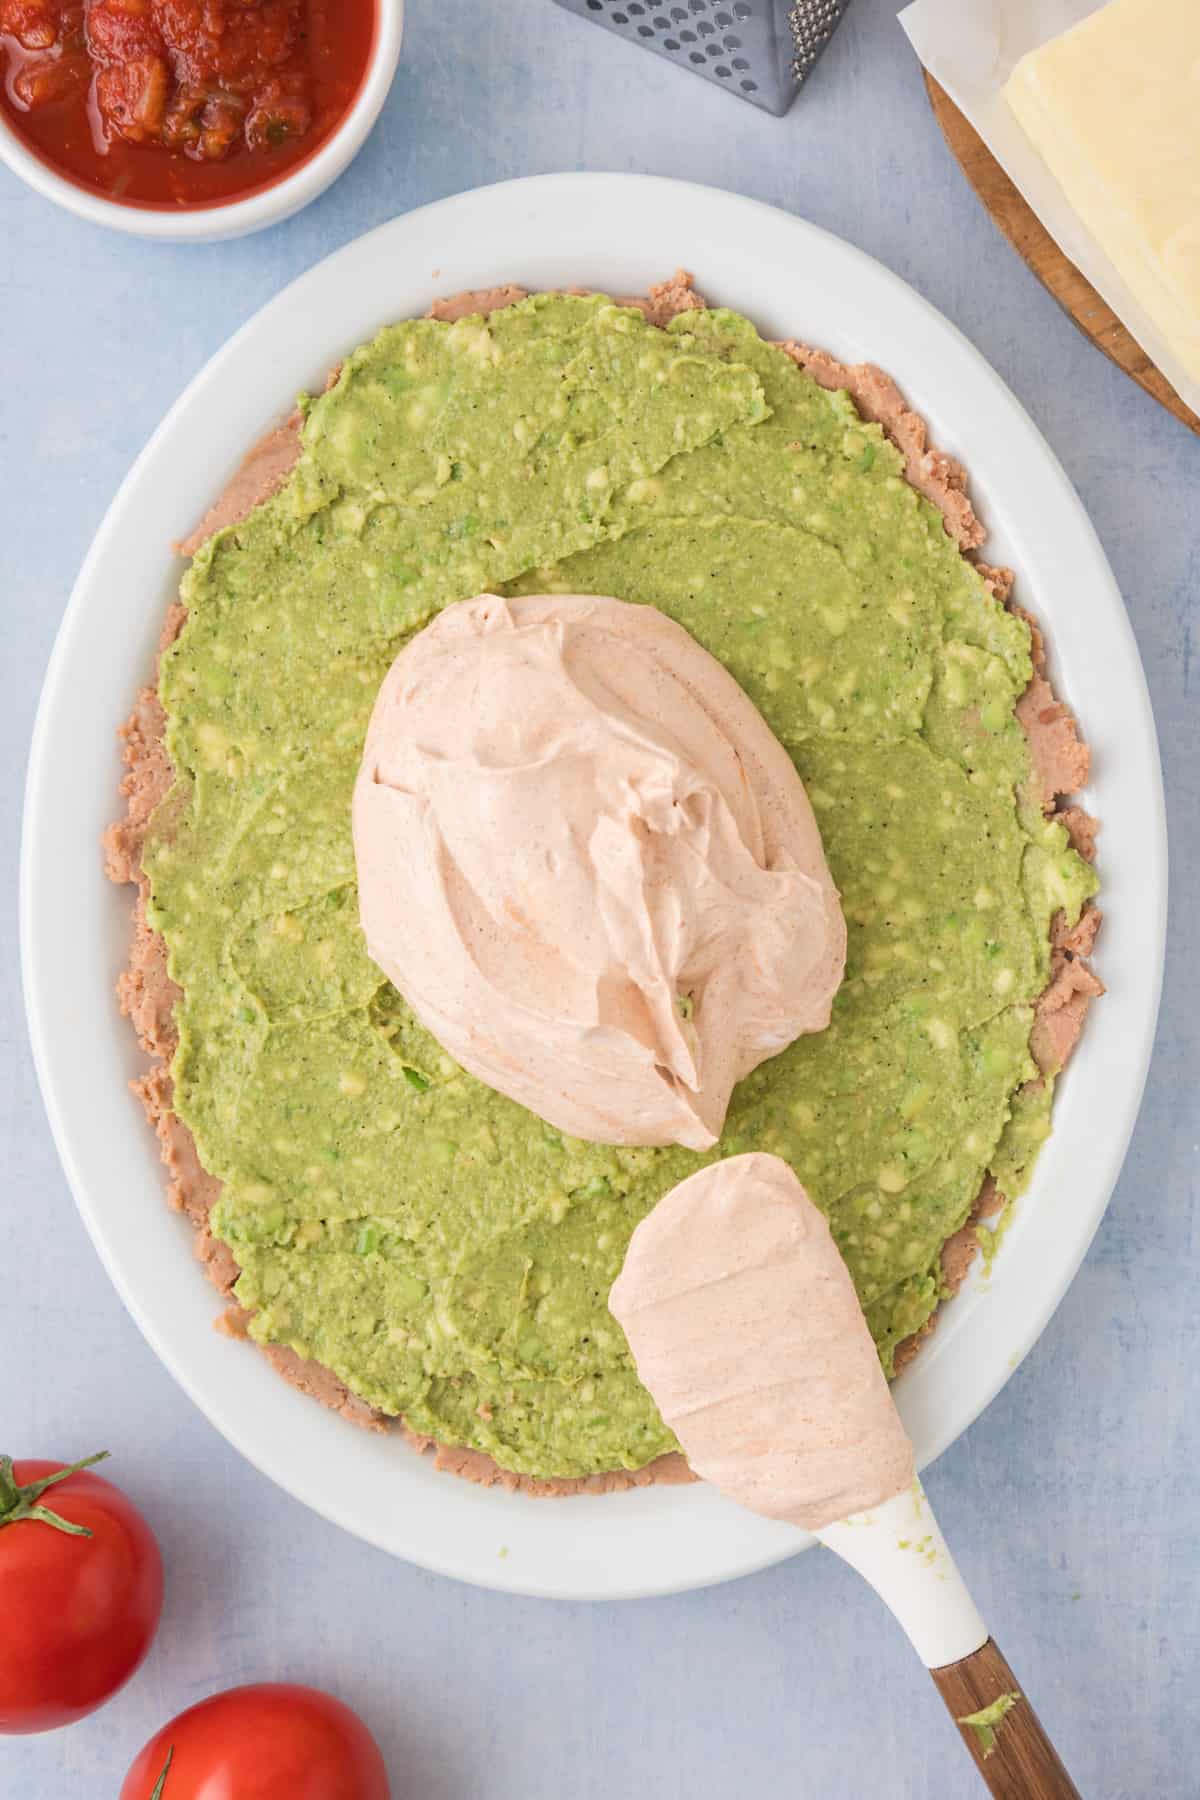 sour cream and taco seasoning mixture being spread on top of smashed avocados